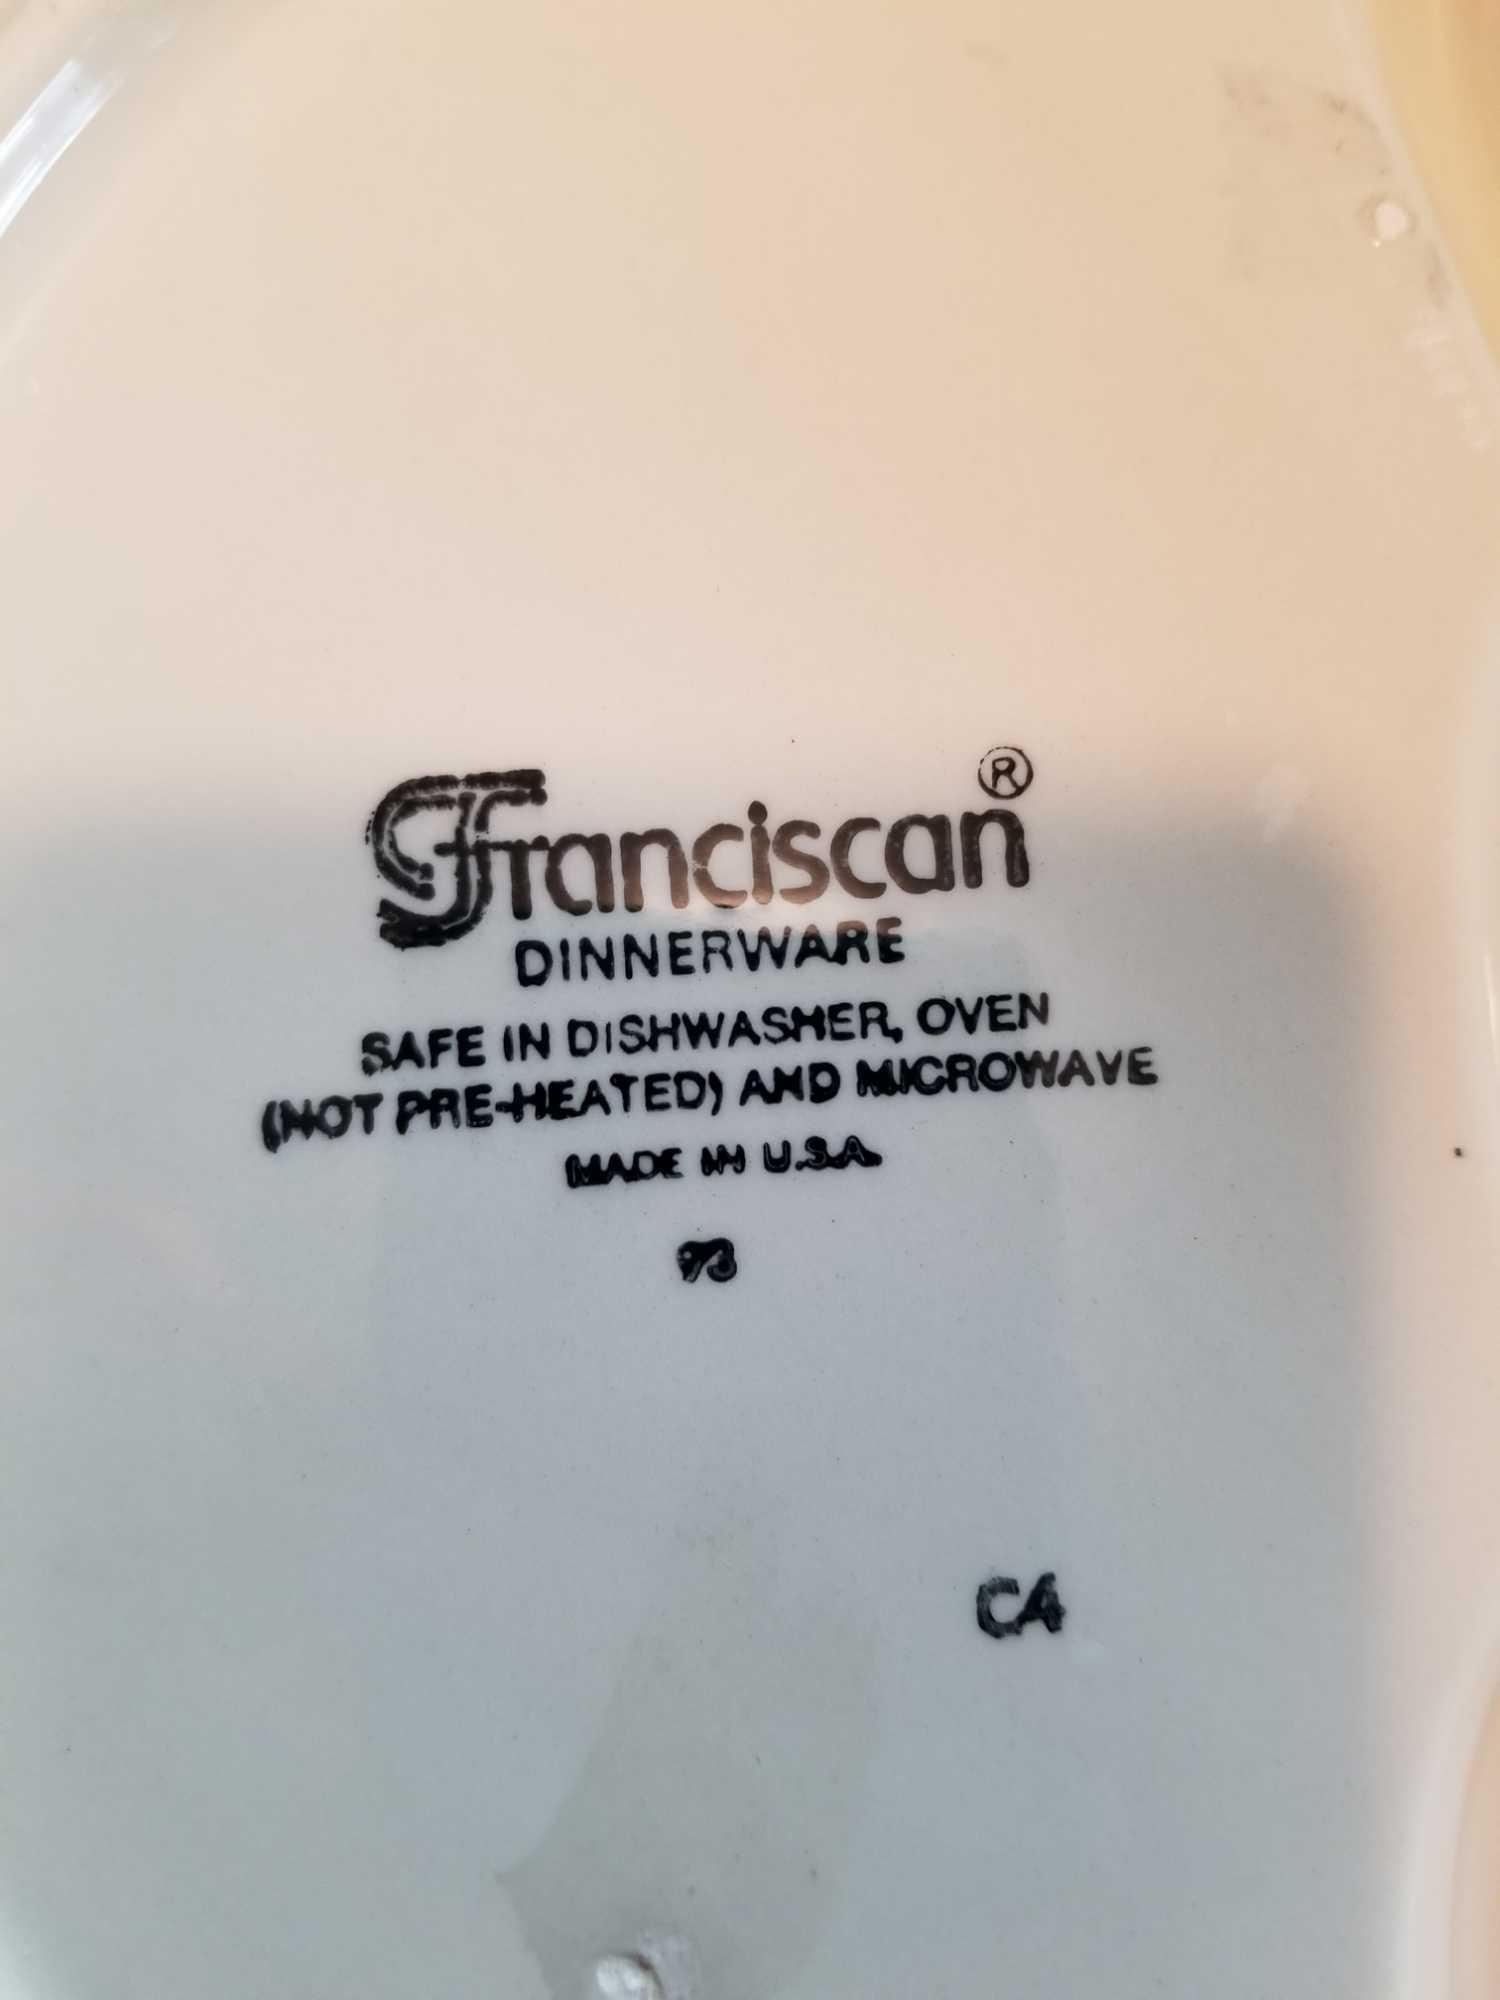 B2 - Franciscan Dinnerware and Others